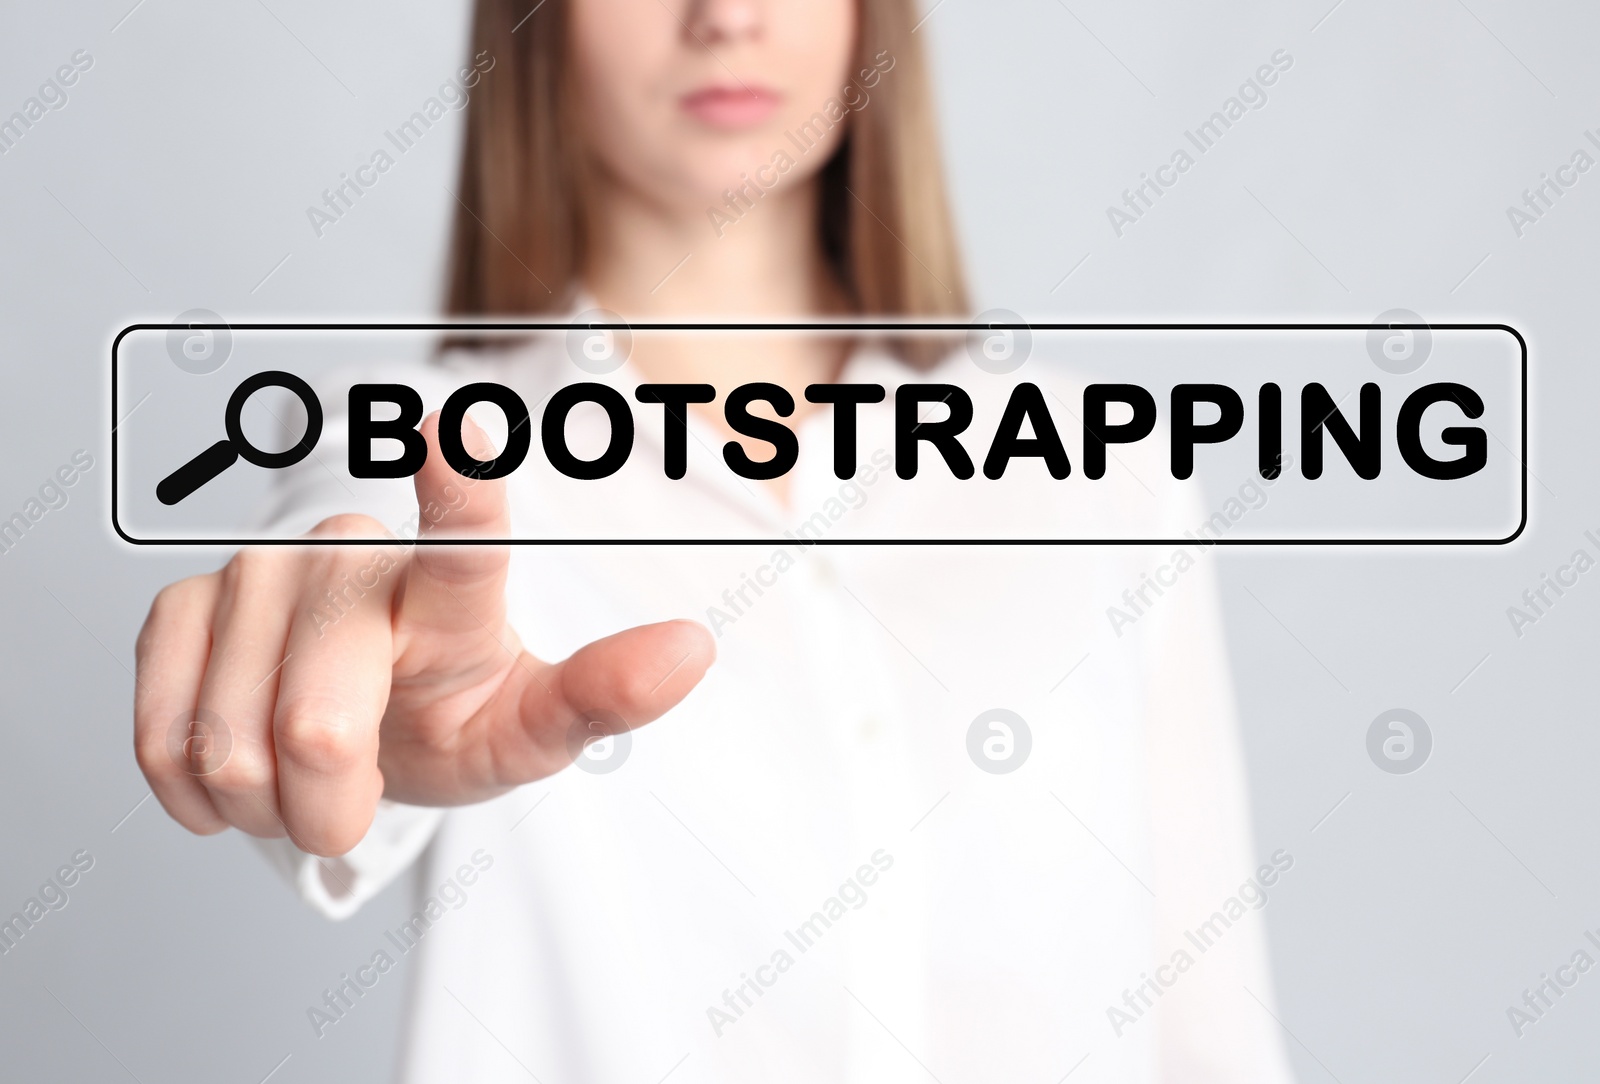 Image of Woman touching virtual screen with word BOOTSTRAPPING in search bar against light background, focus on hand